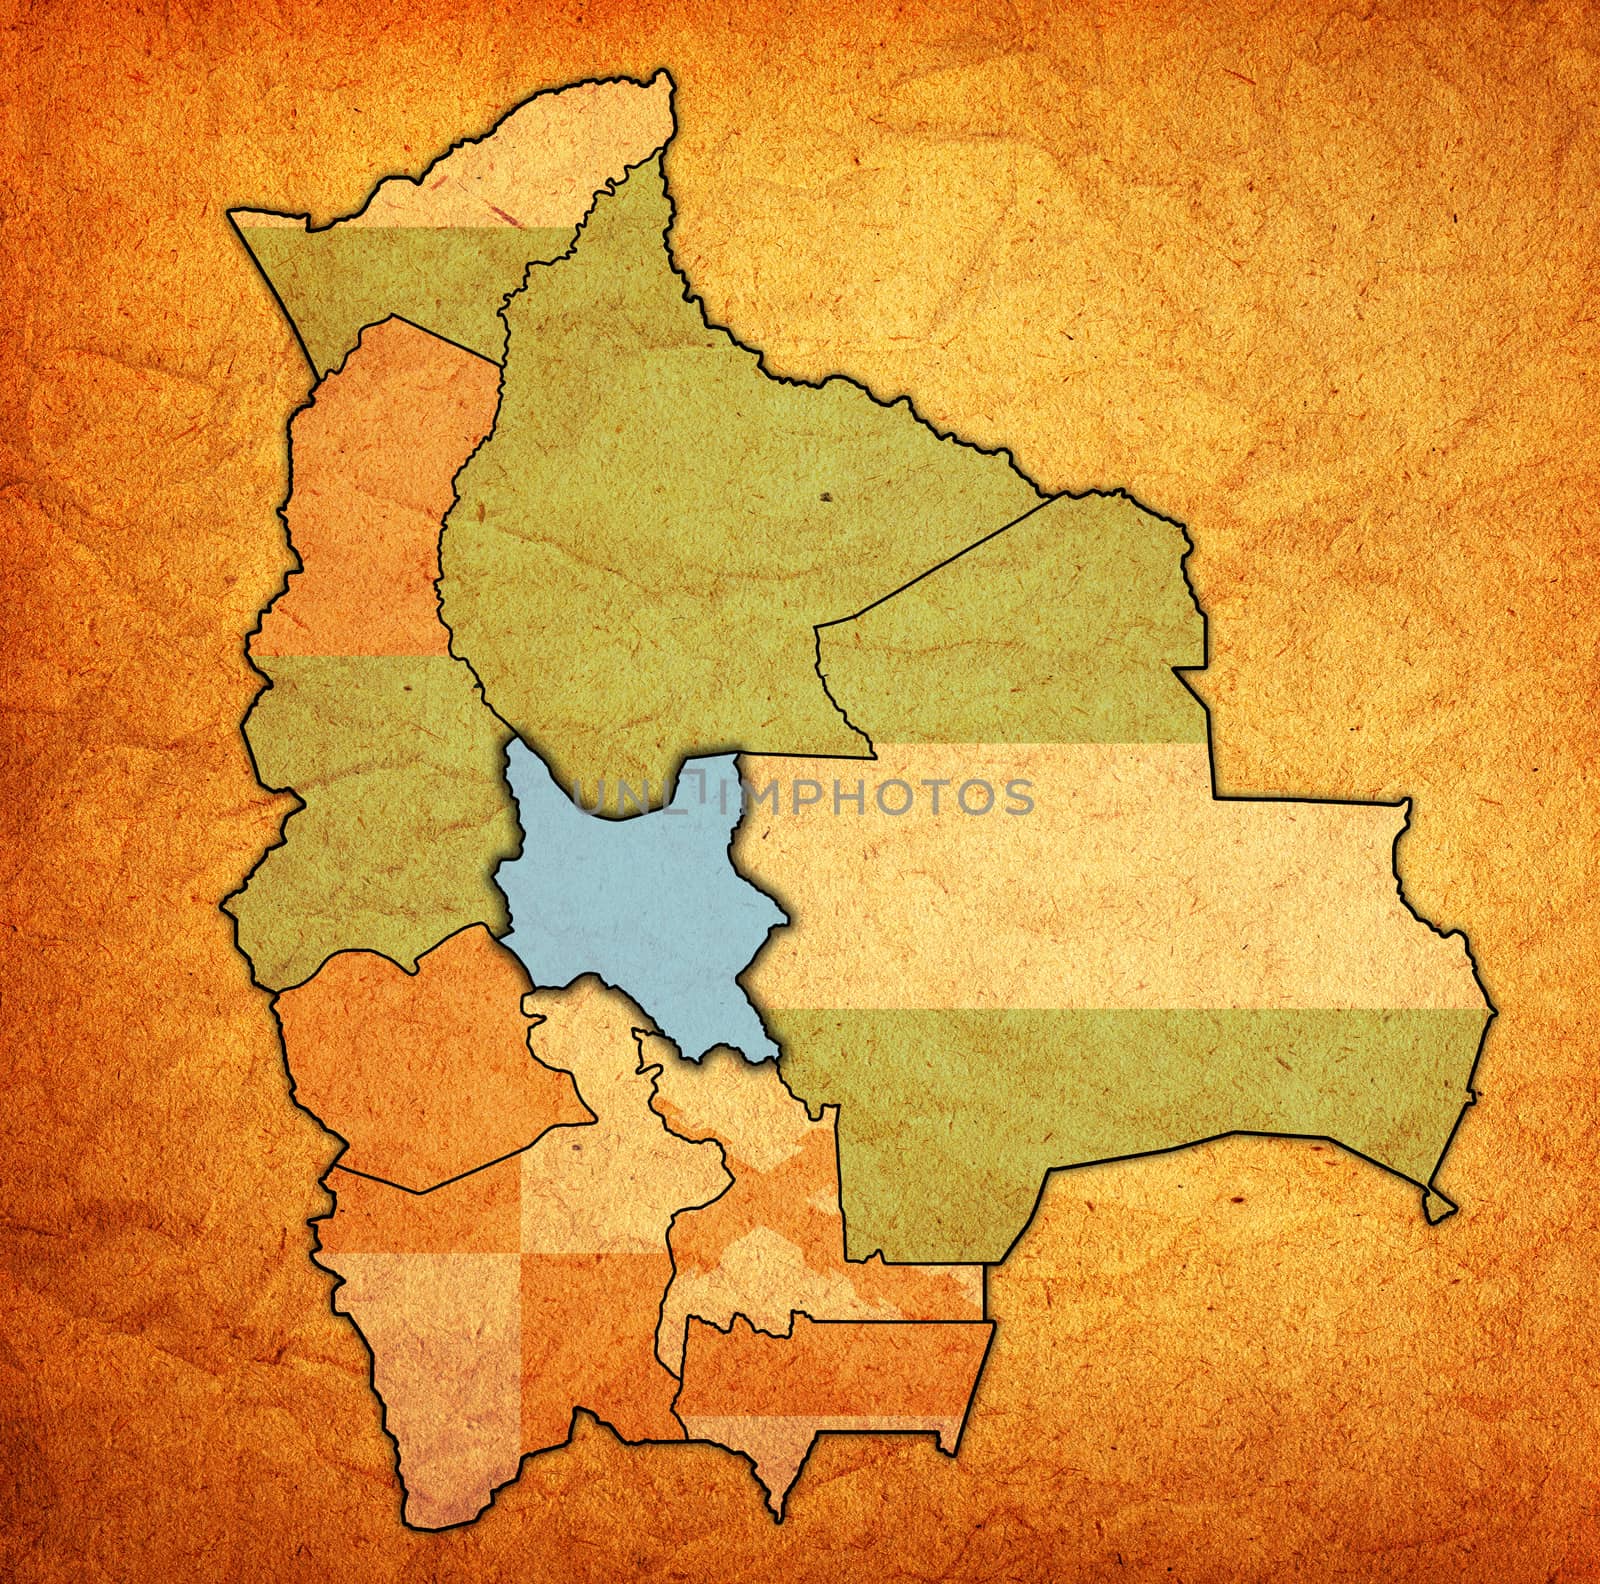 territory and flag of cochabamba region on map with administrative divisions and borders of Bolivia with clipping path